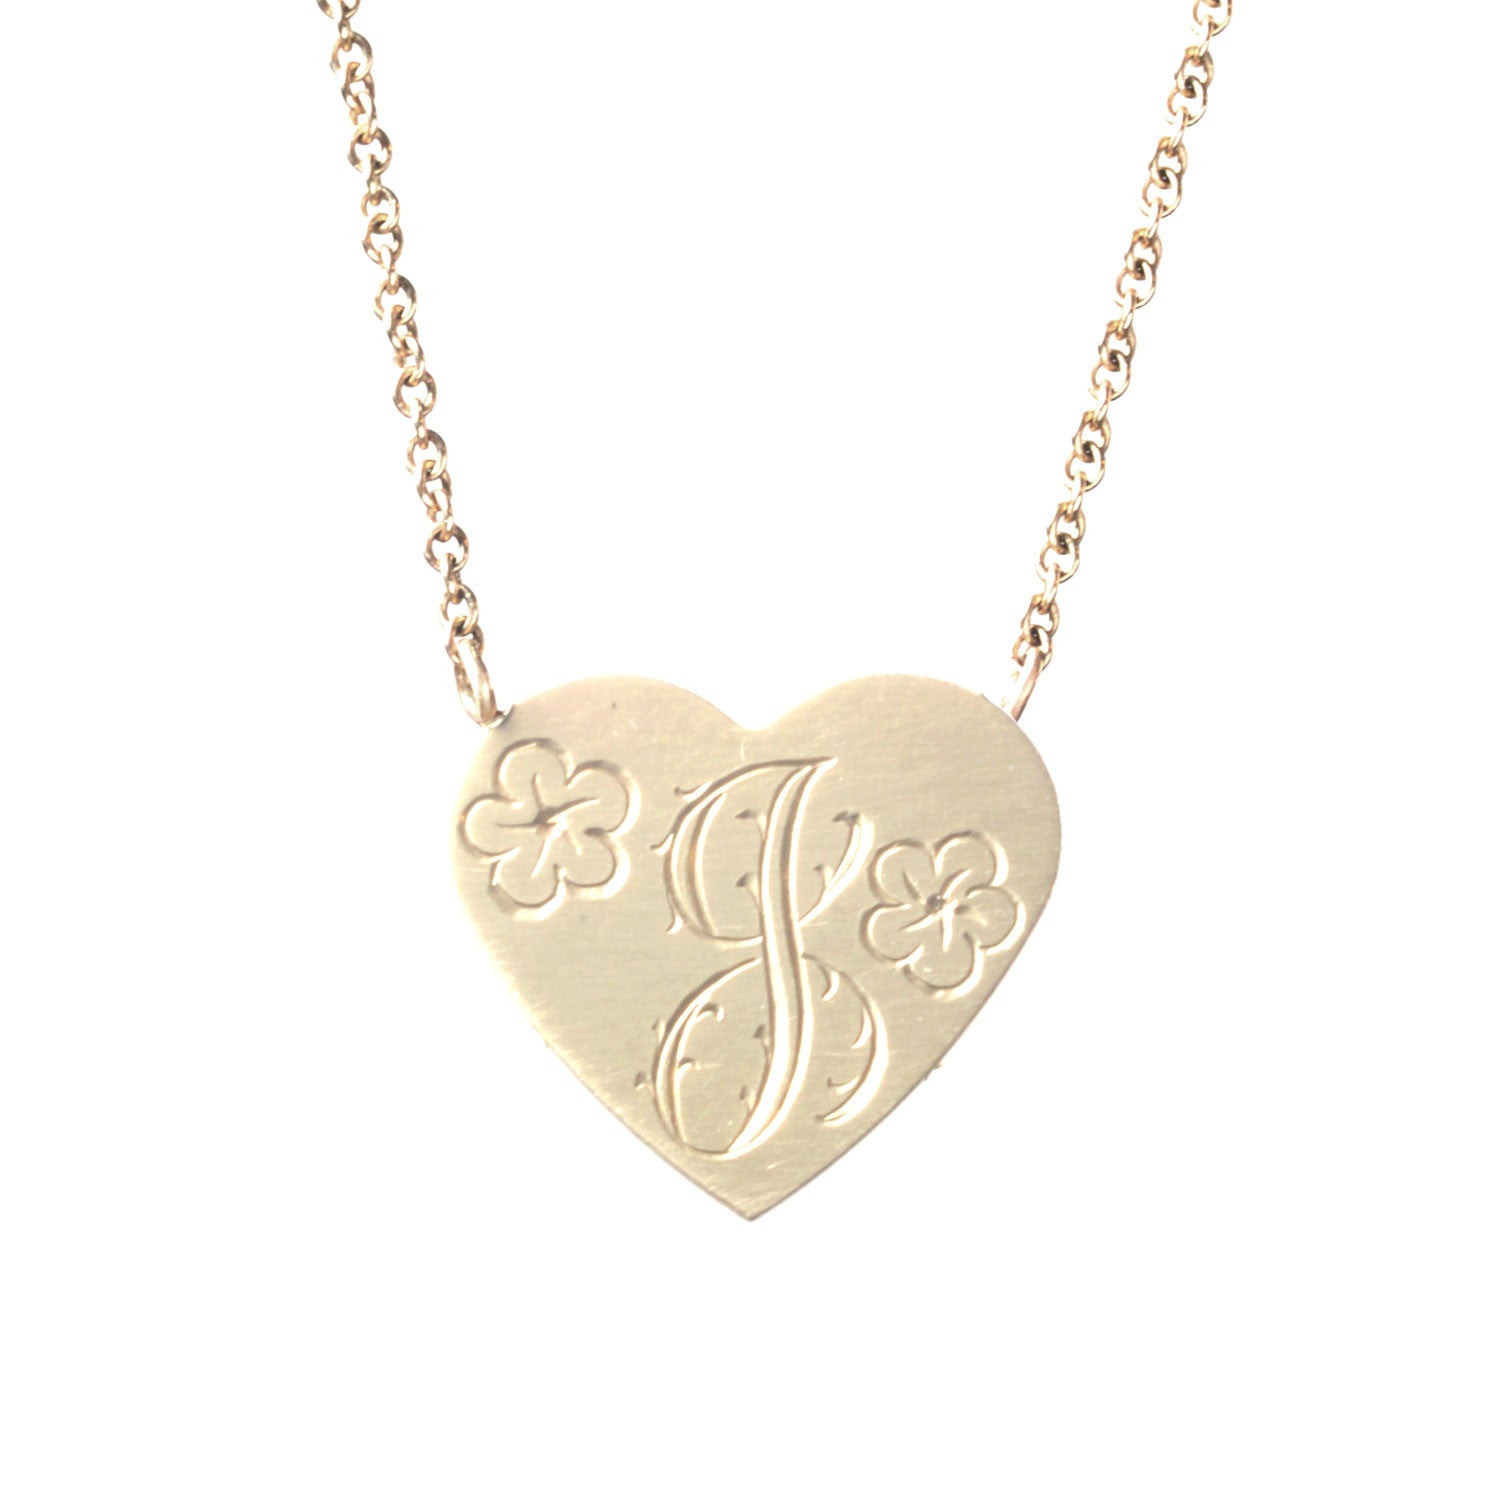 Floral Hand Engraved Initial Necklace Charm Pendant Signet